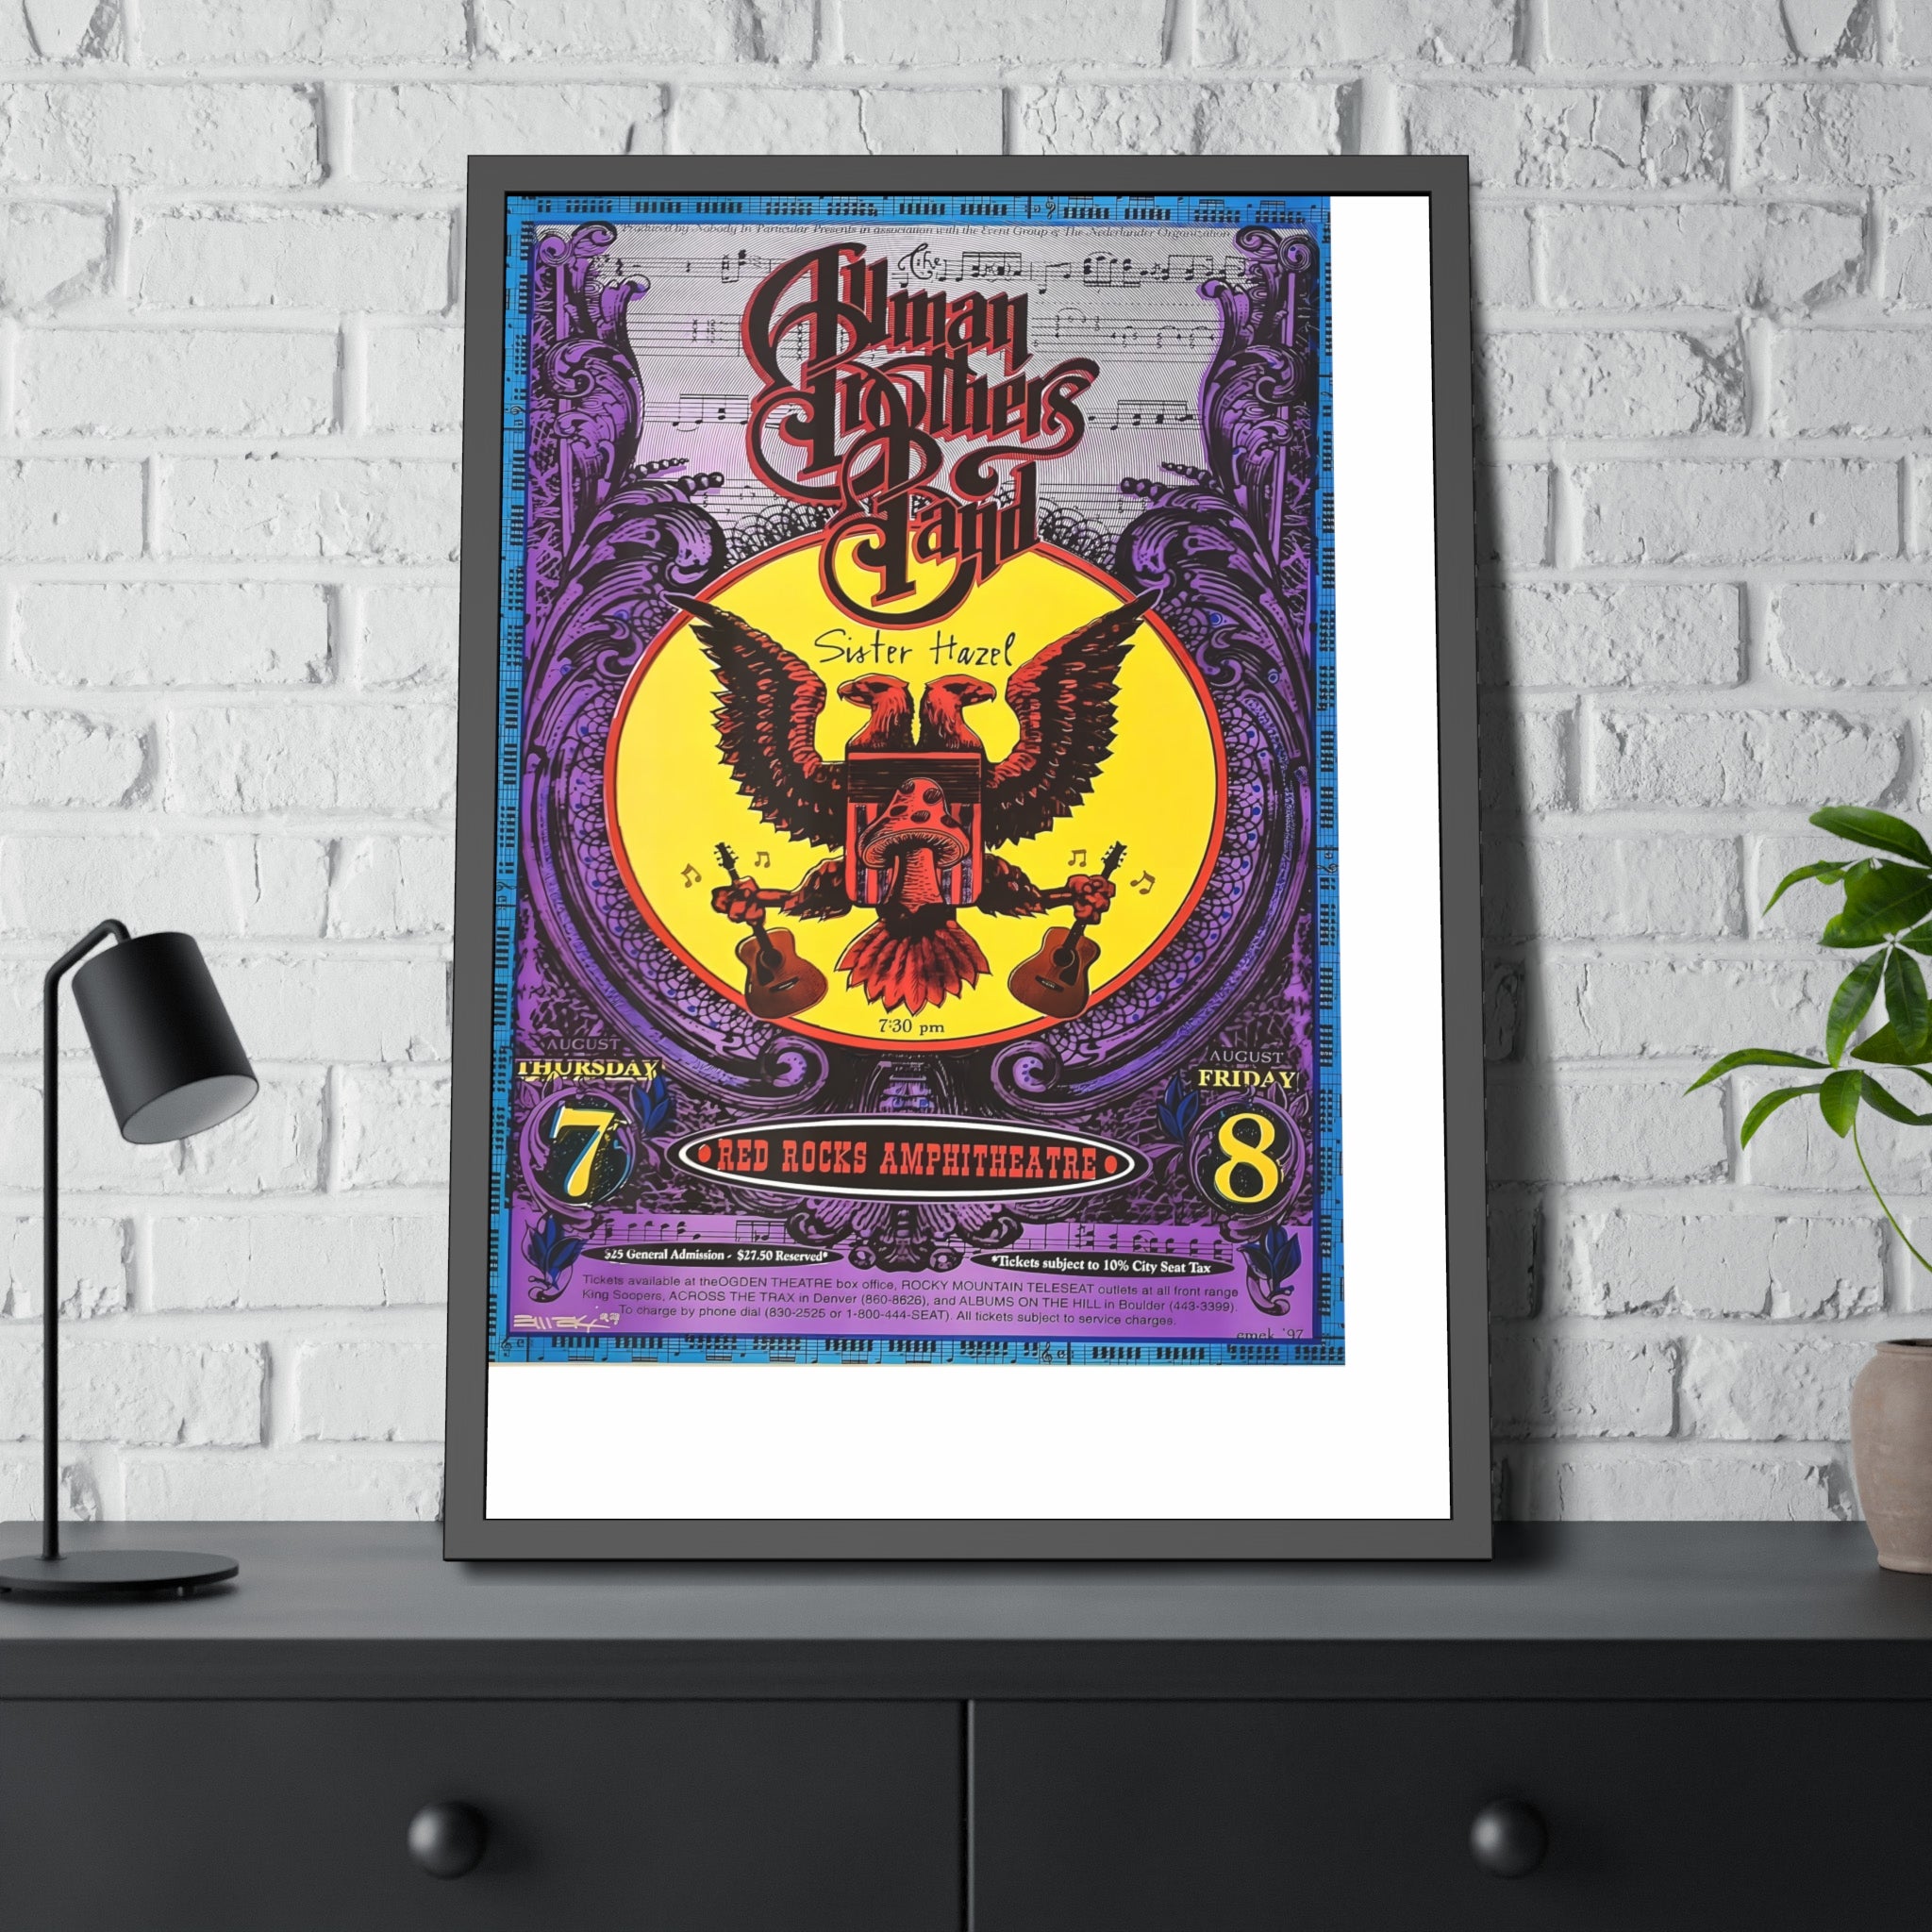 Allman Brothers Band Concert Poster